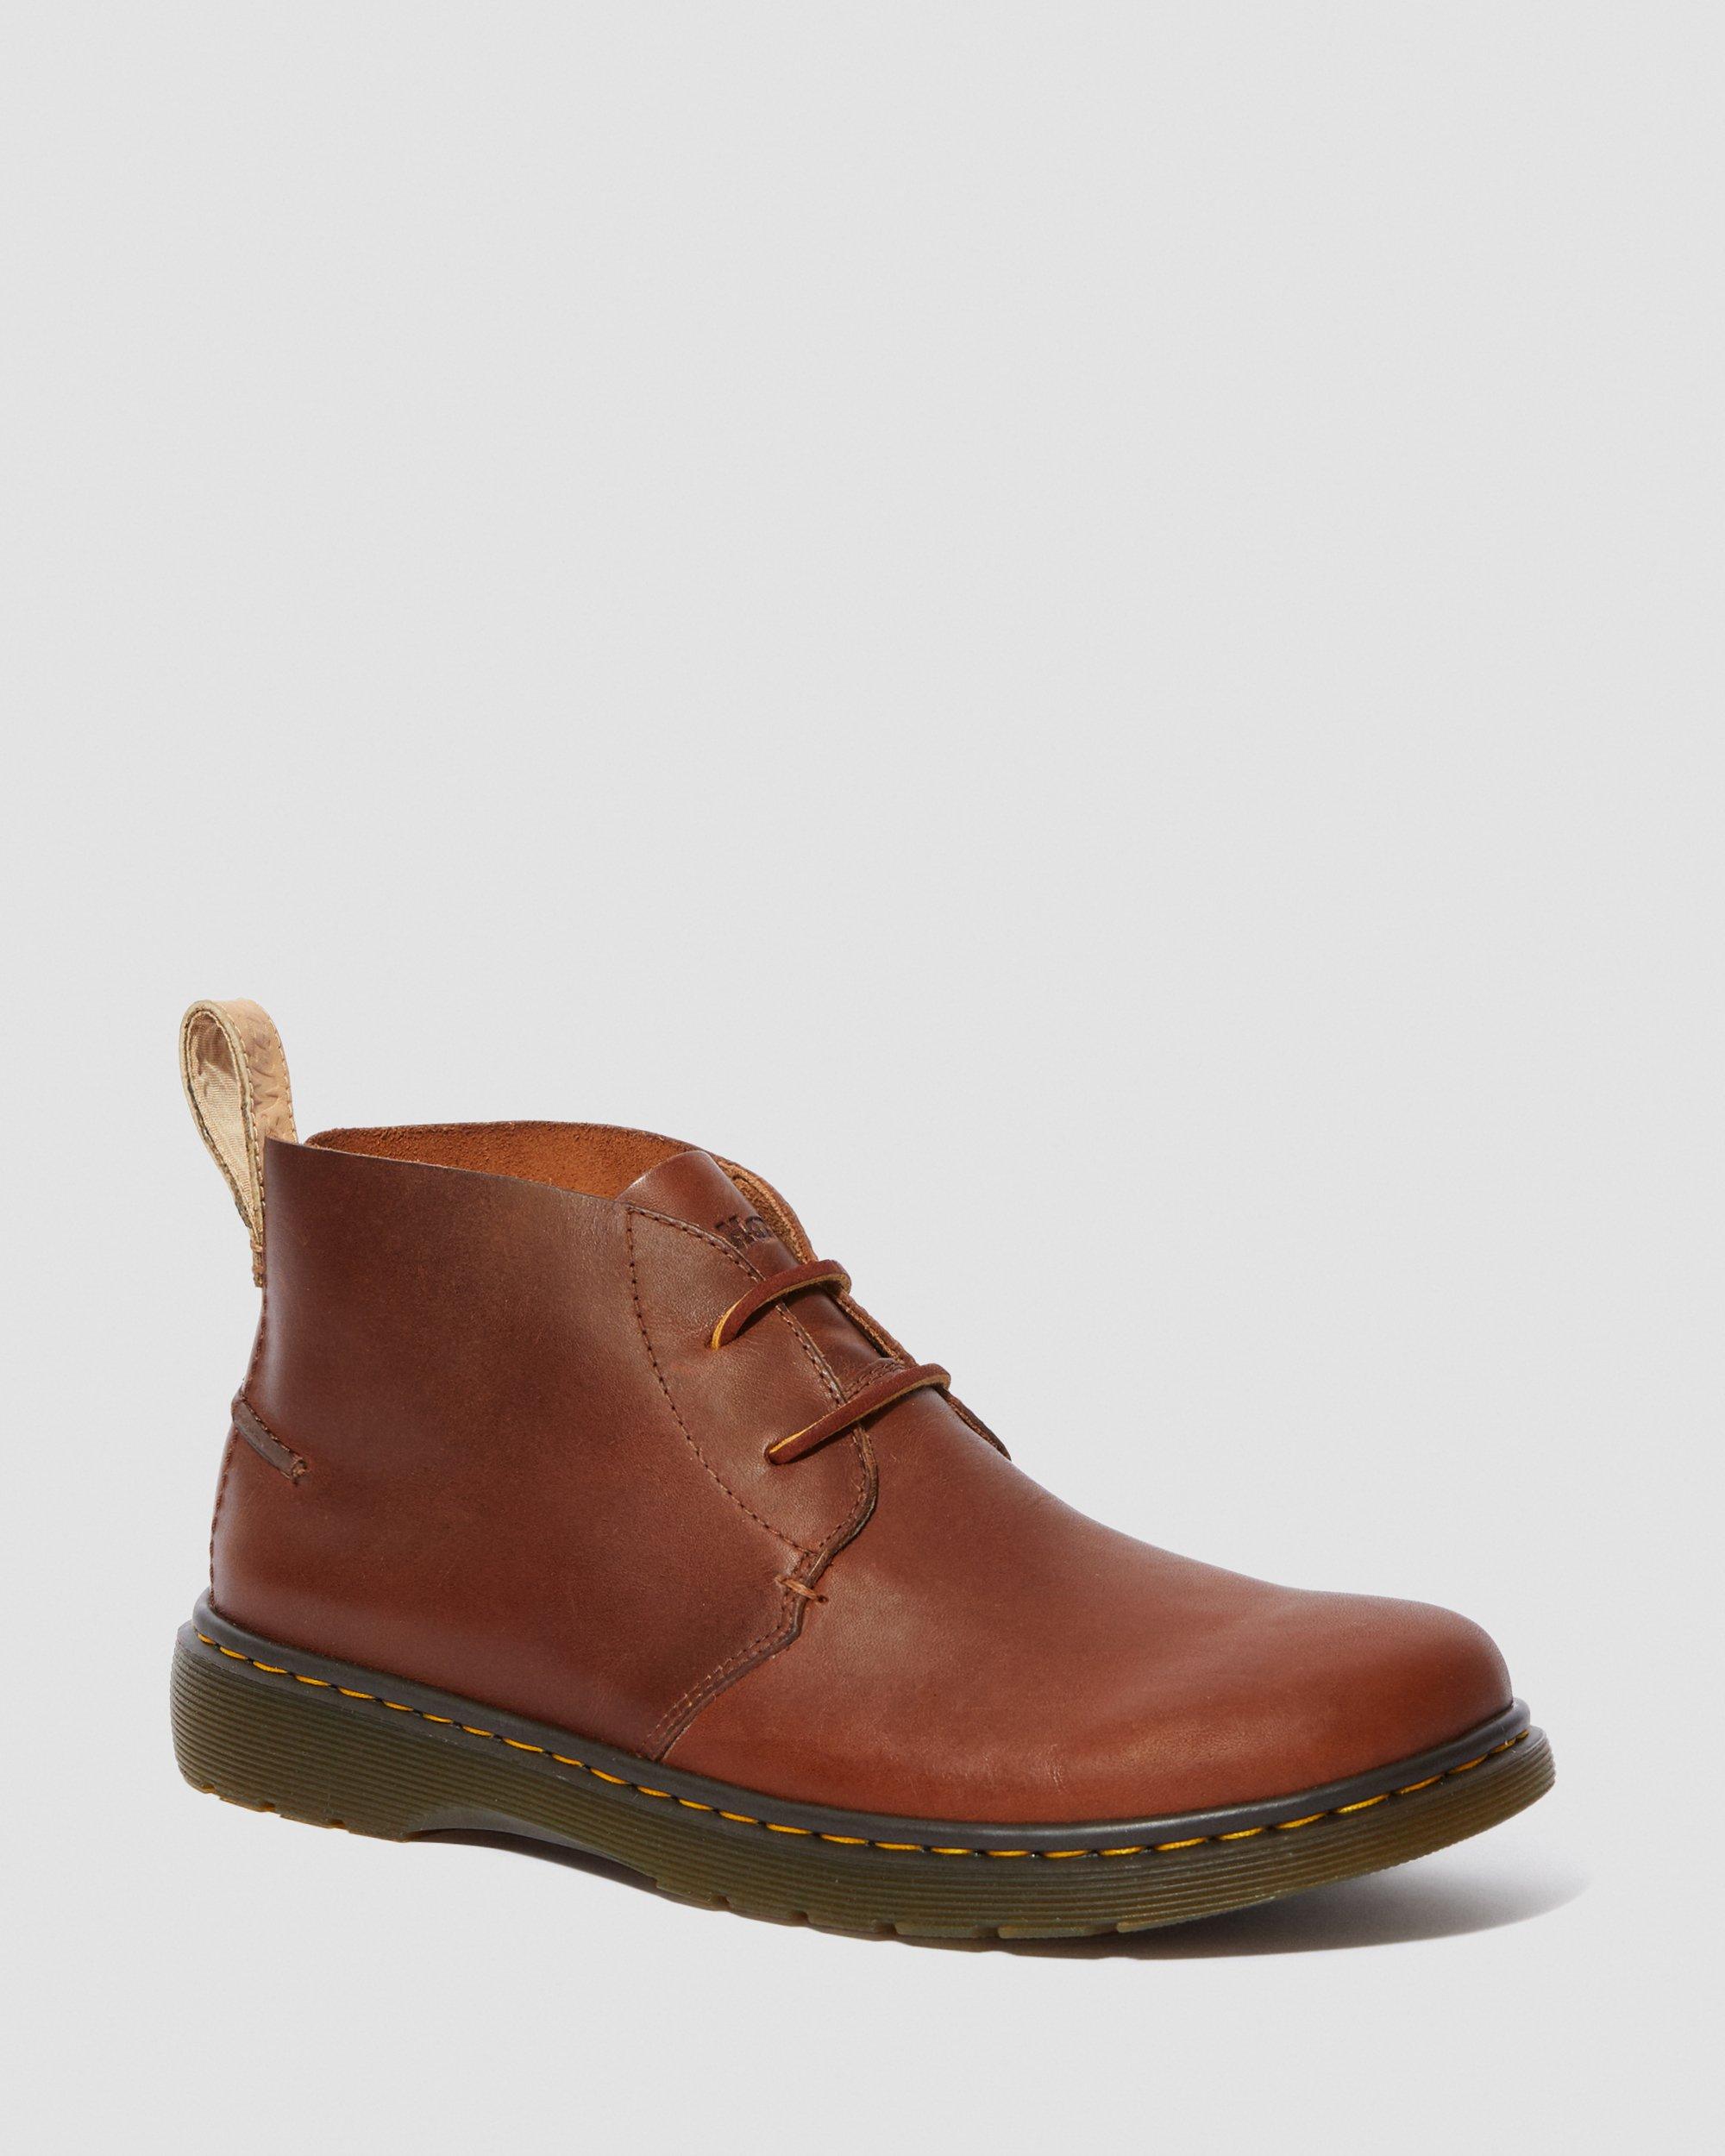 EMBER LEATHER CHUKKA BOOTS | Martens